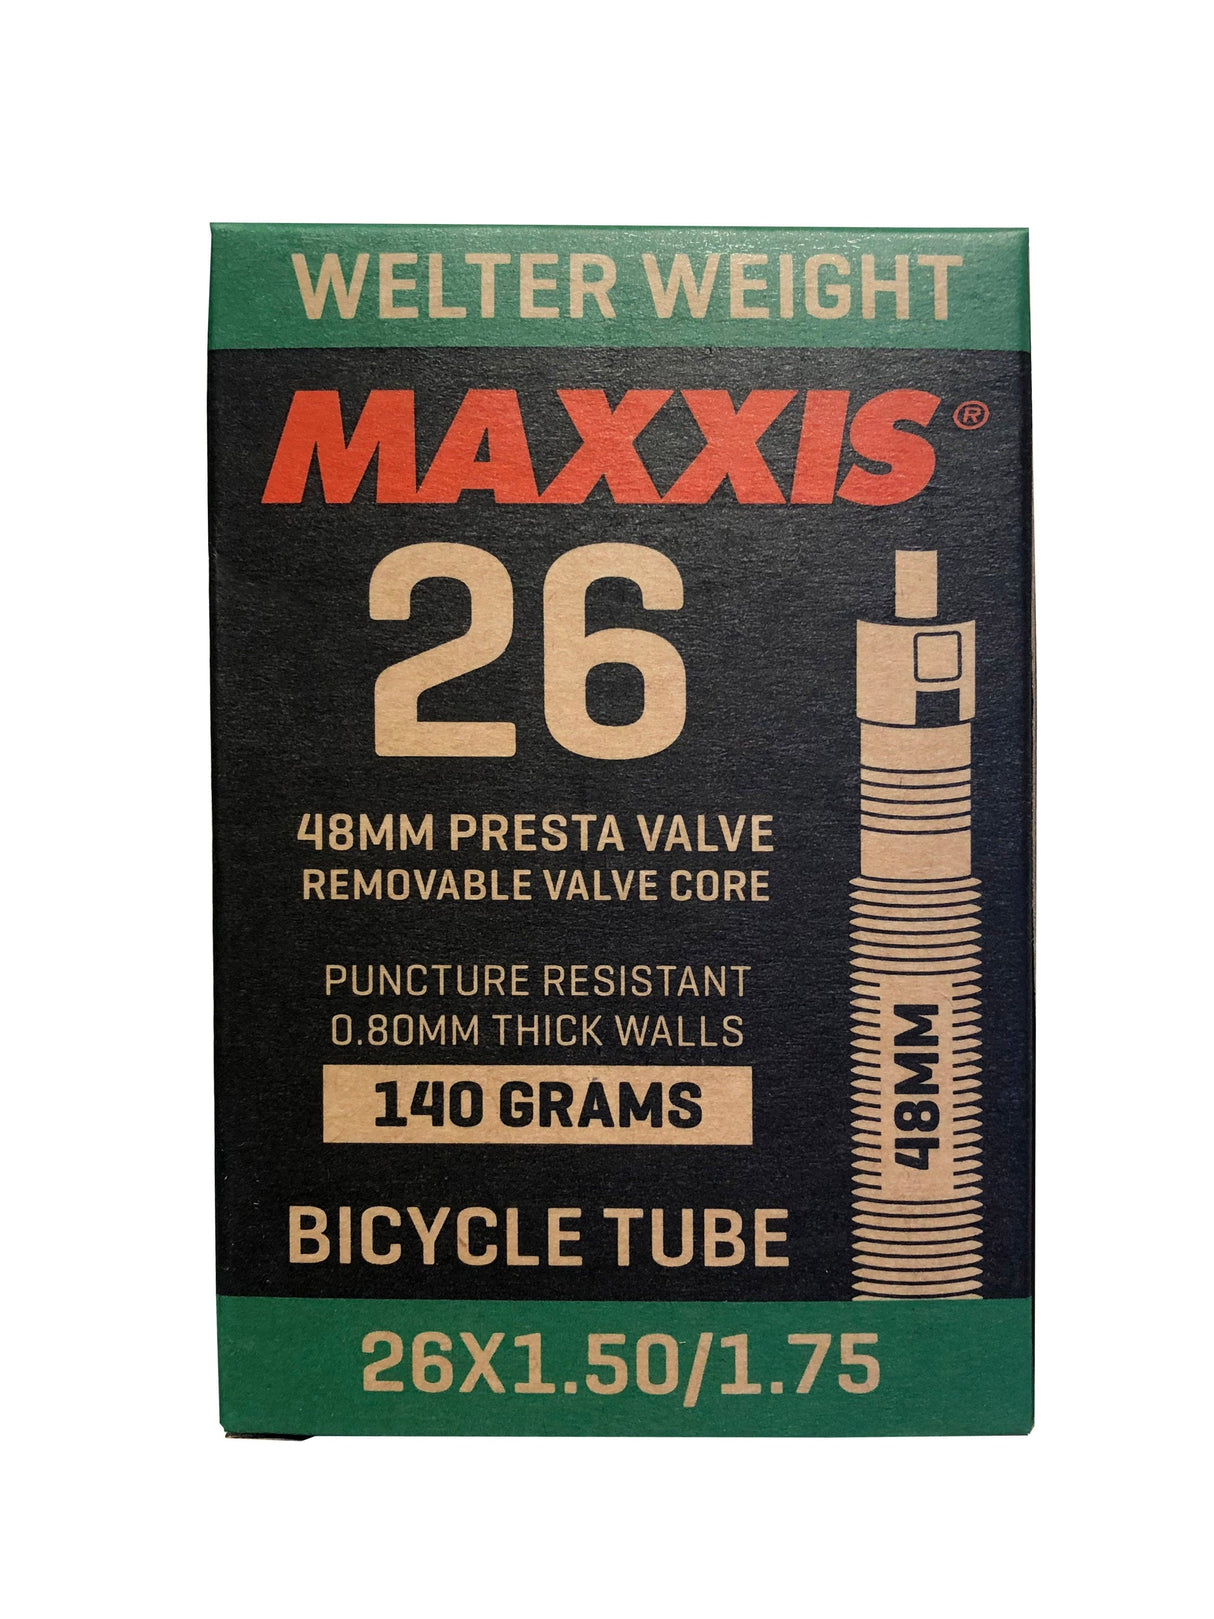 MAXXIS Tube Welter Weight 26 x 1.5 1.75 Presta Fv RVC 48mm